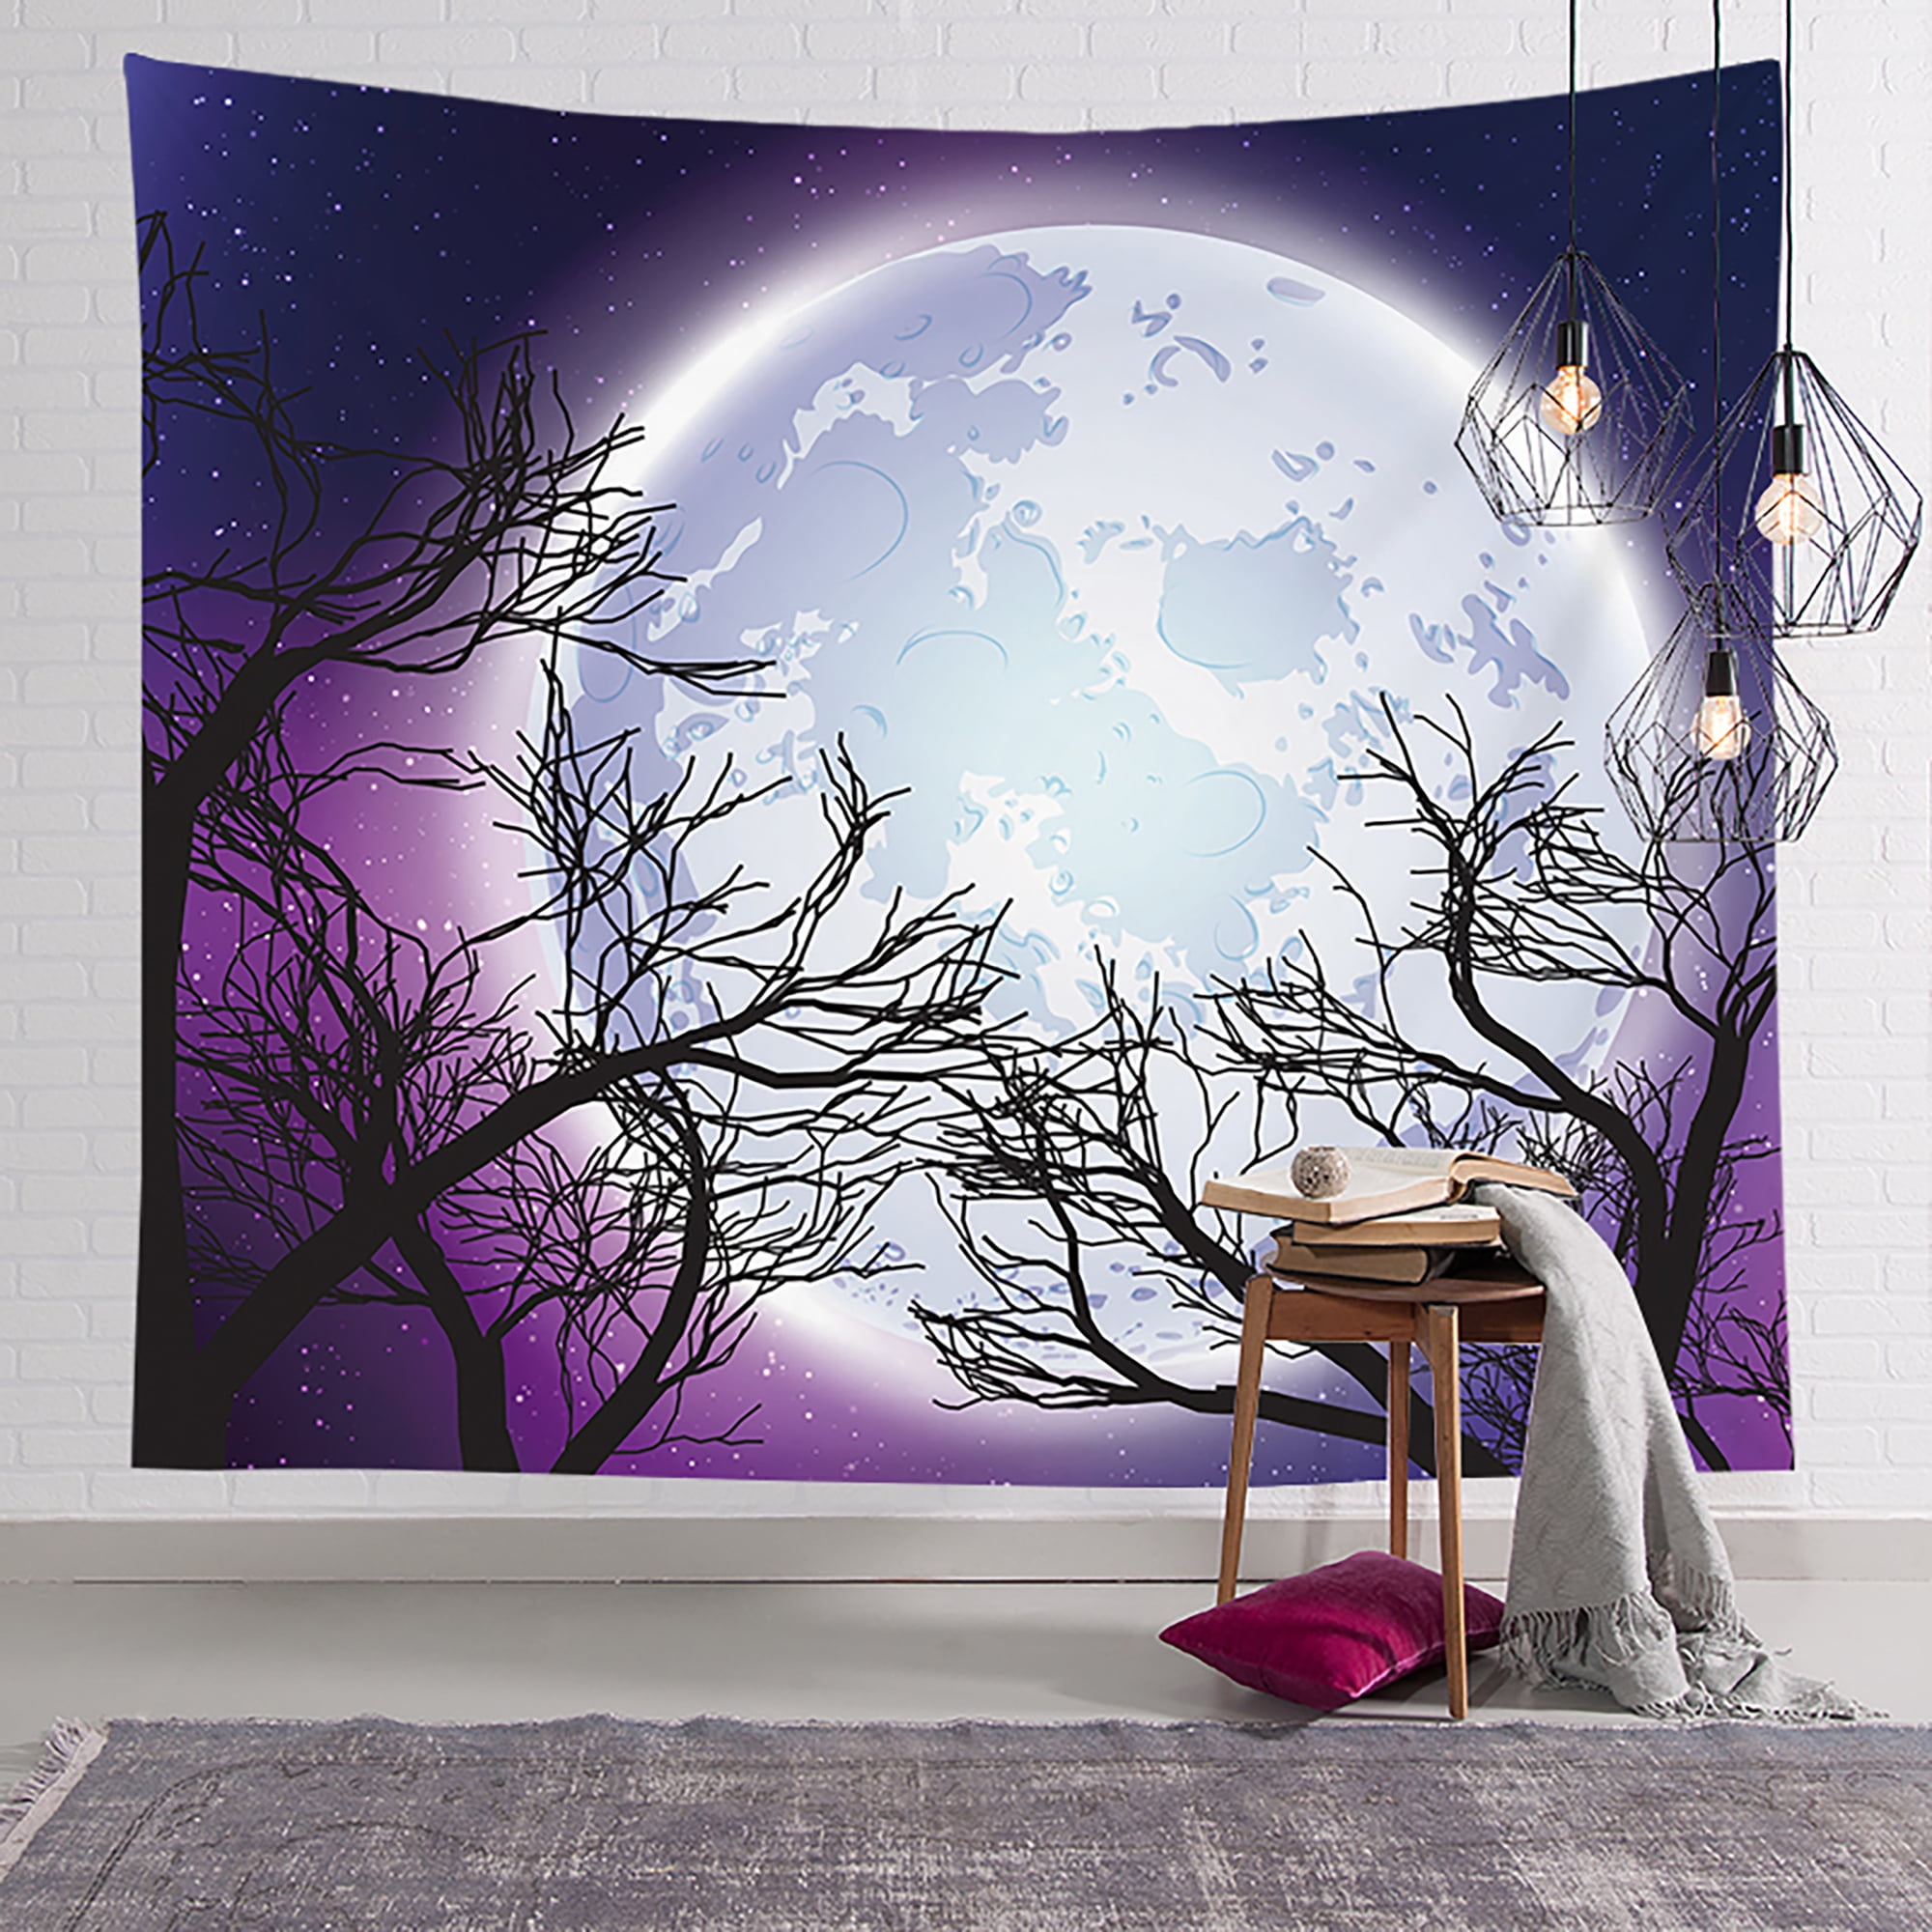 CUH Feather Moon Landscape Wall Tapestry Art Poster for Dorm Room Wall Hanging Blanket Home Decor